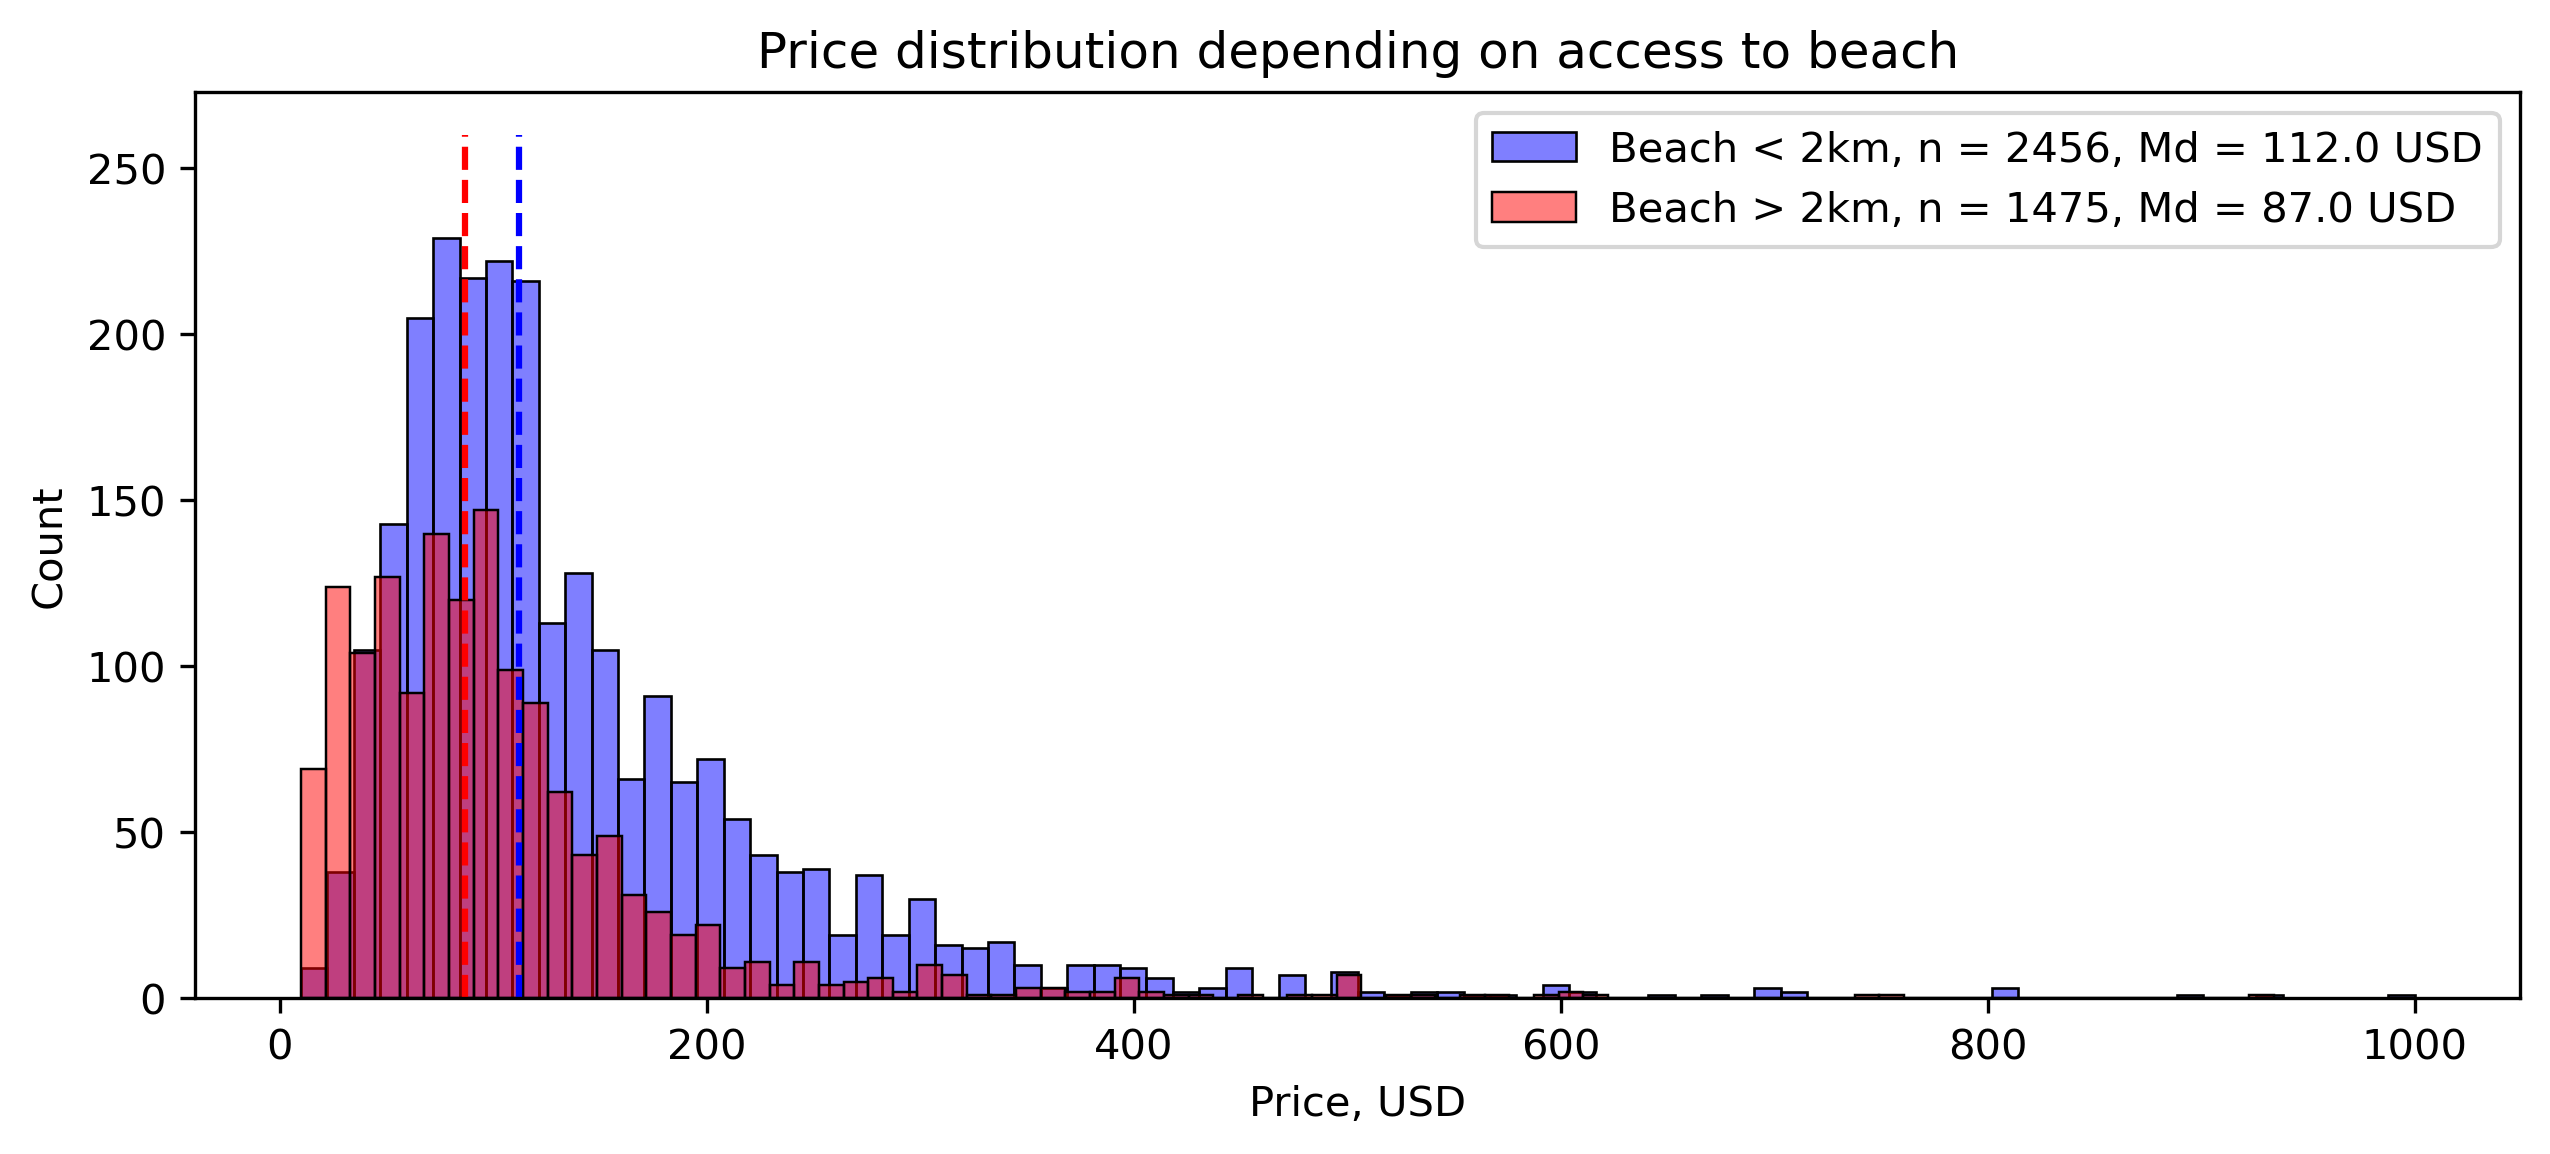 Price distribution for accommodations with and without beach access in less than 2km